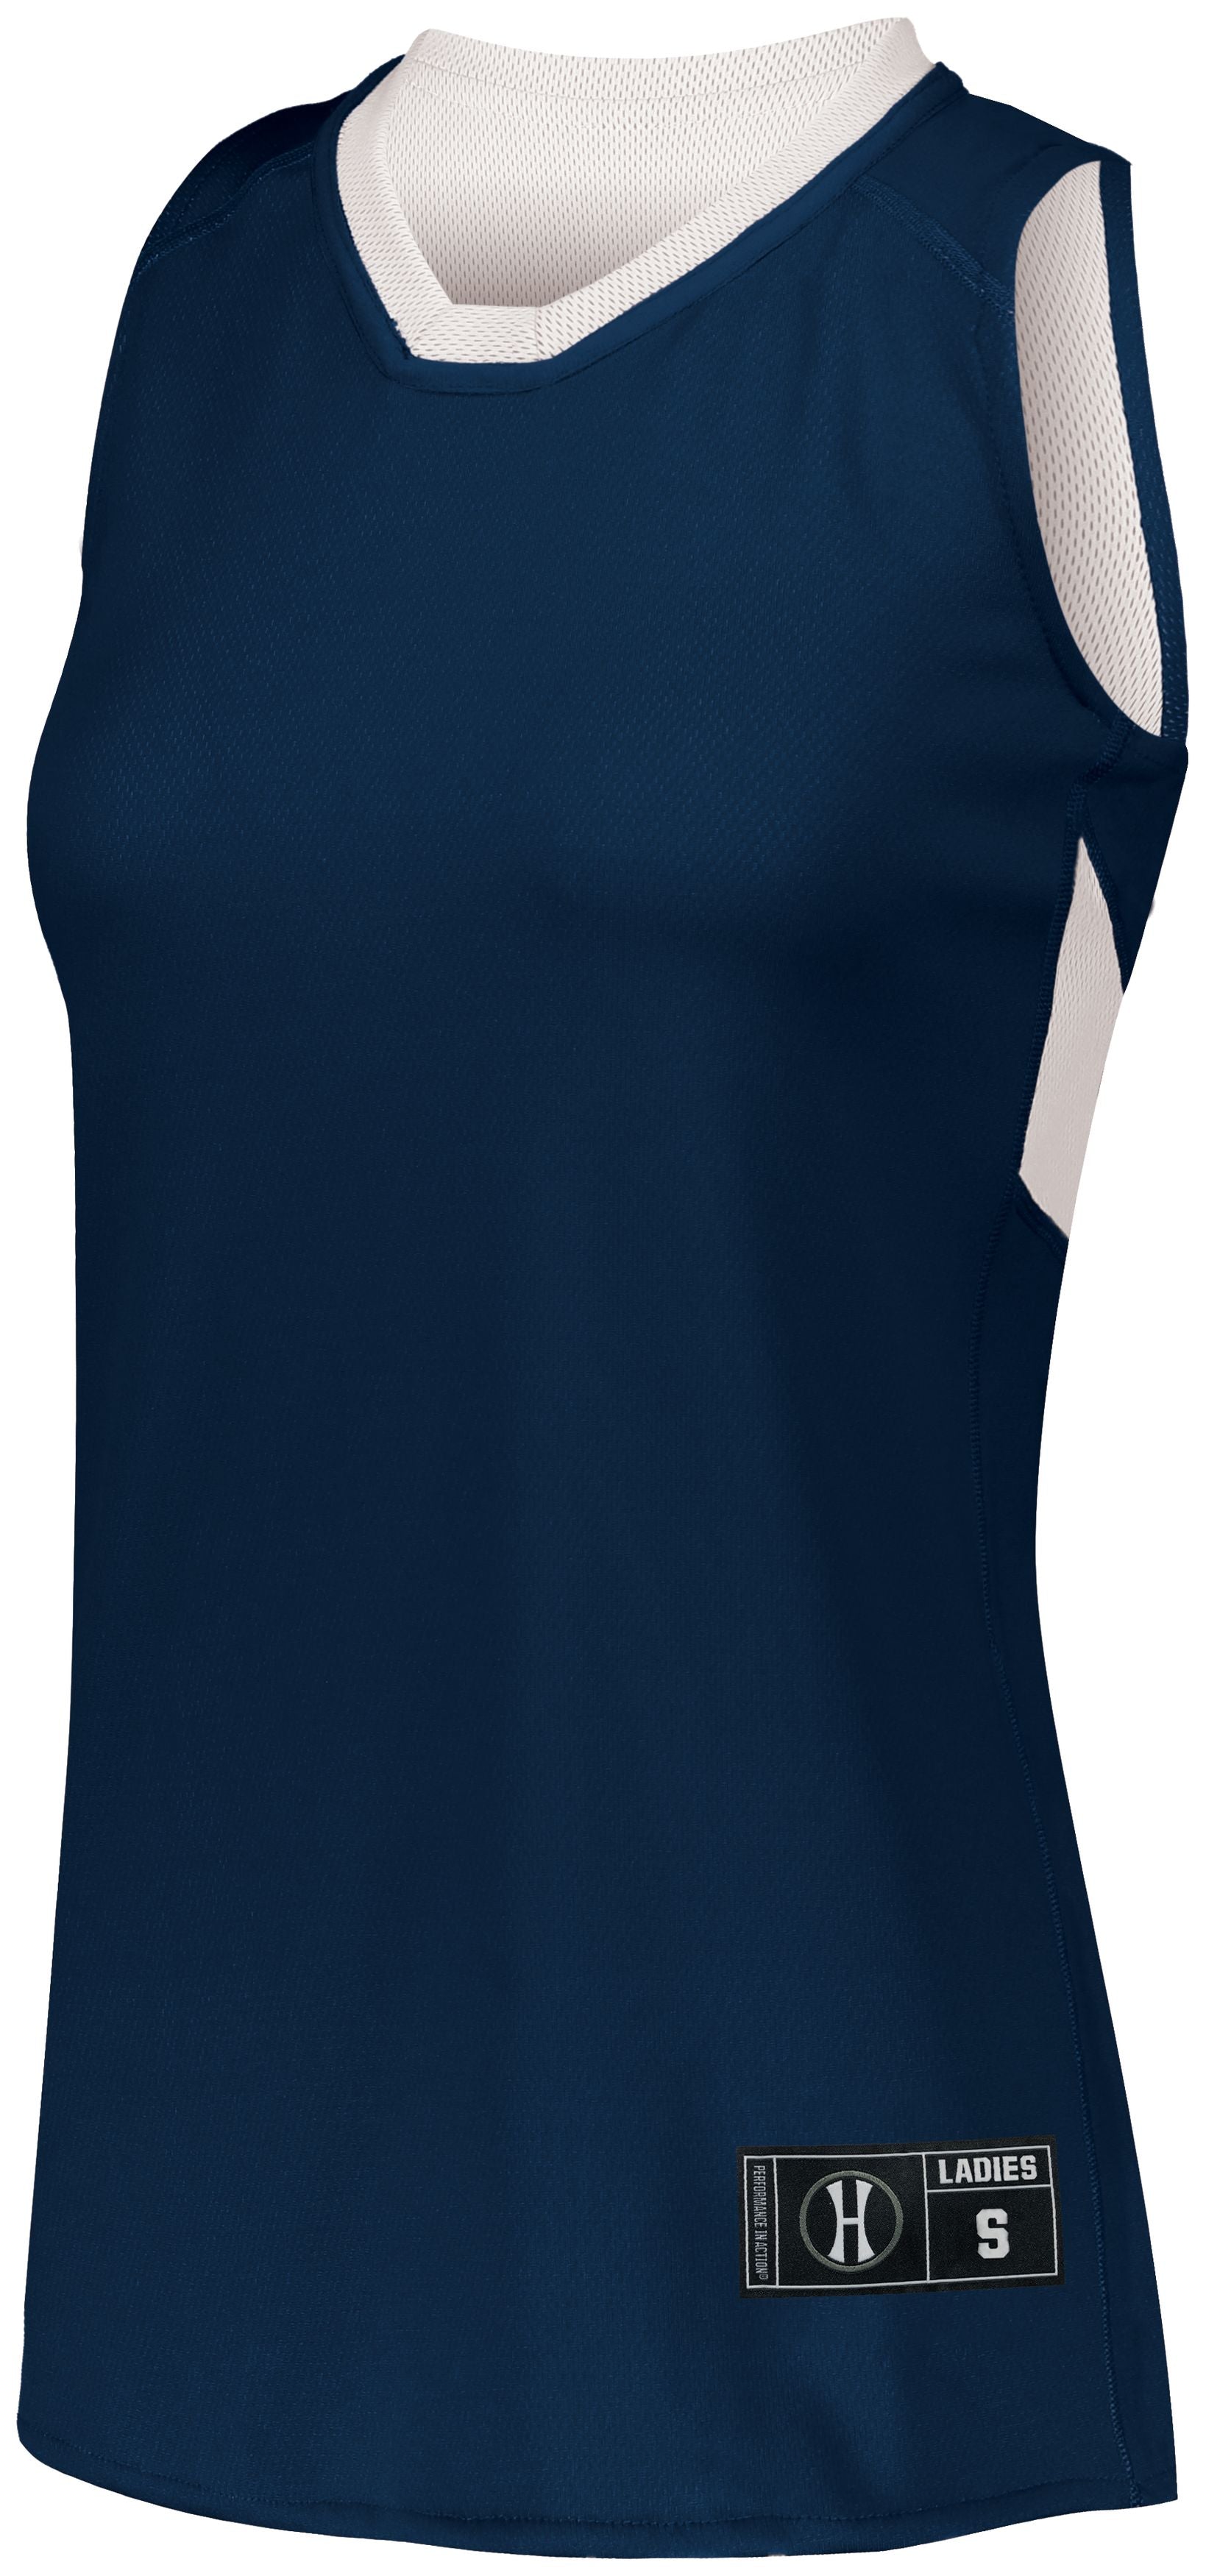 Ladies Dual-Side Single Ply Basketball Jersey 224378